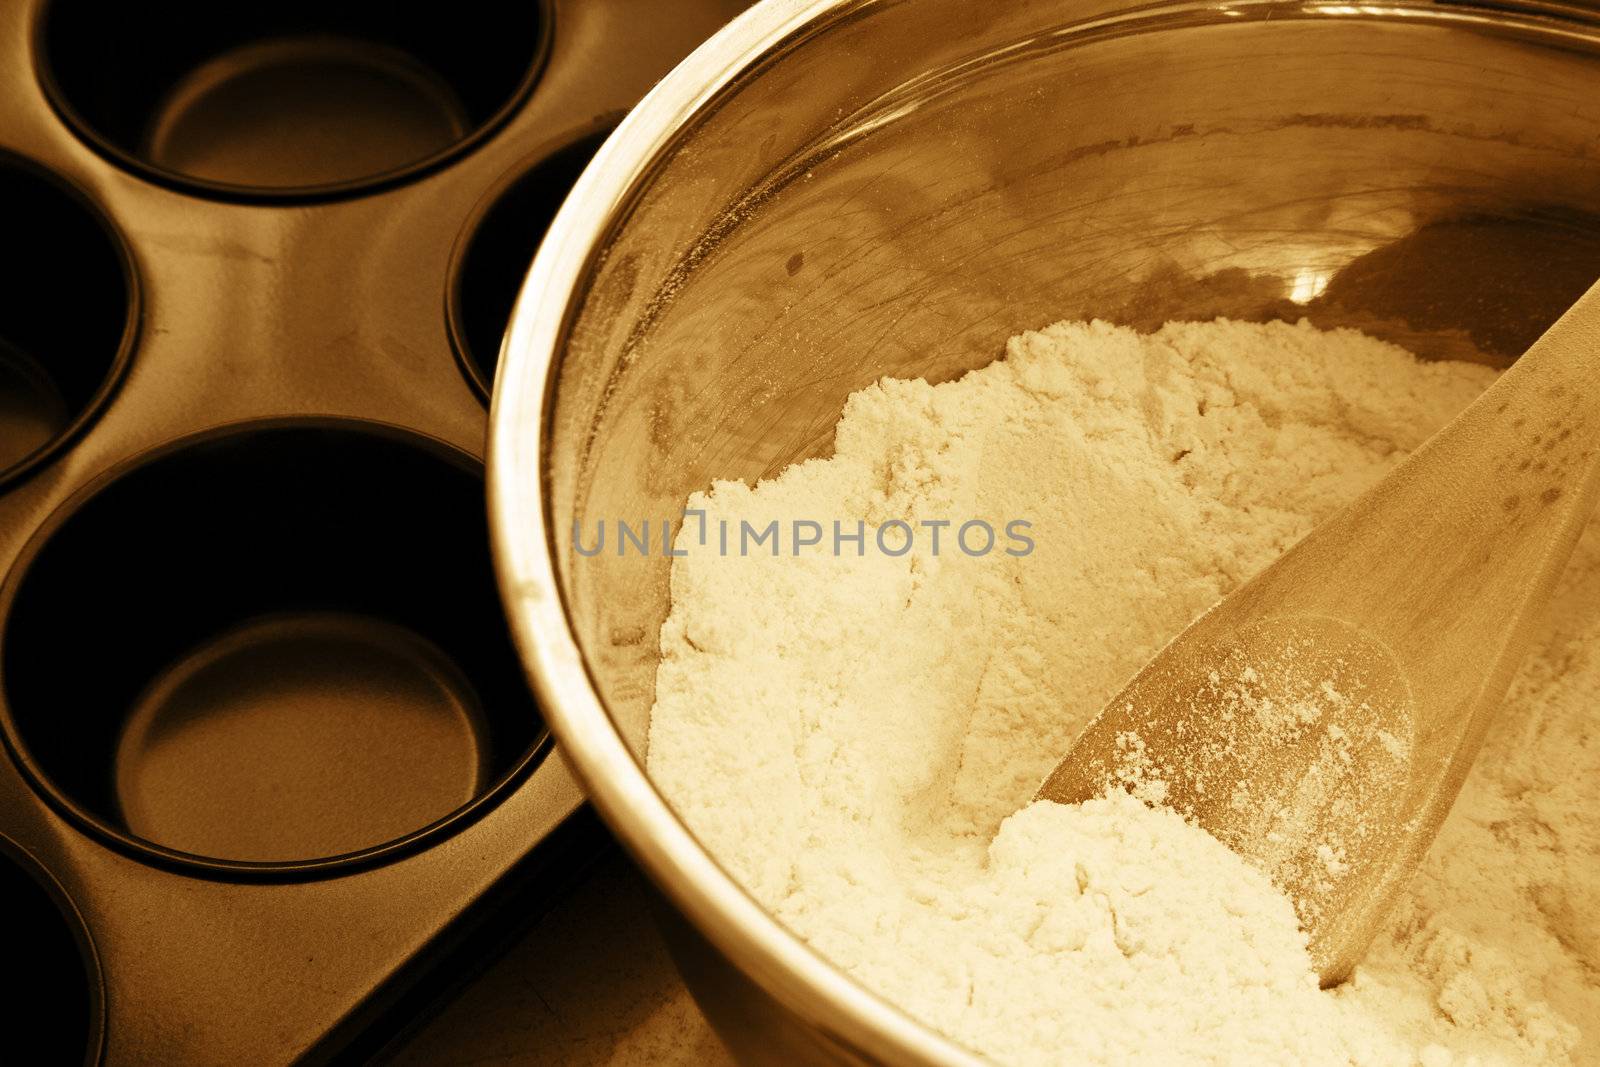 Muffin ingredients in a mixing bowl next to a baking tray before cooking.